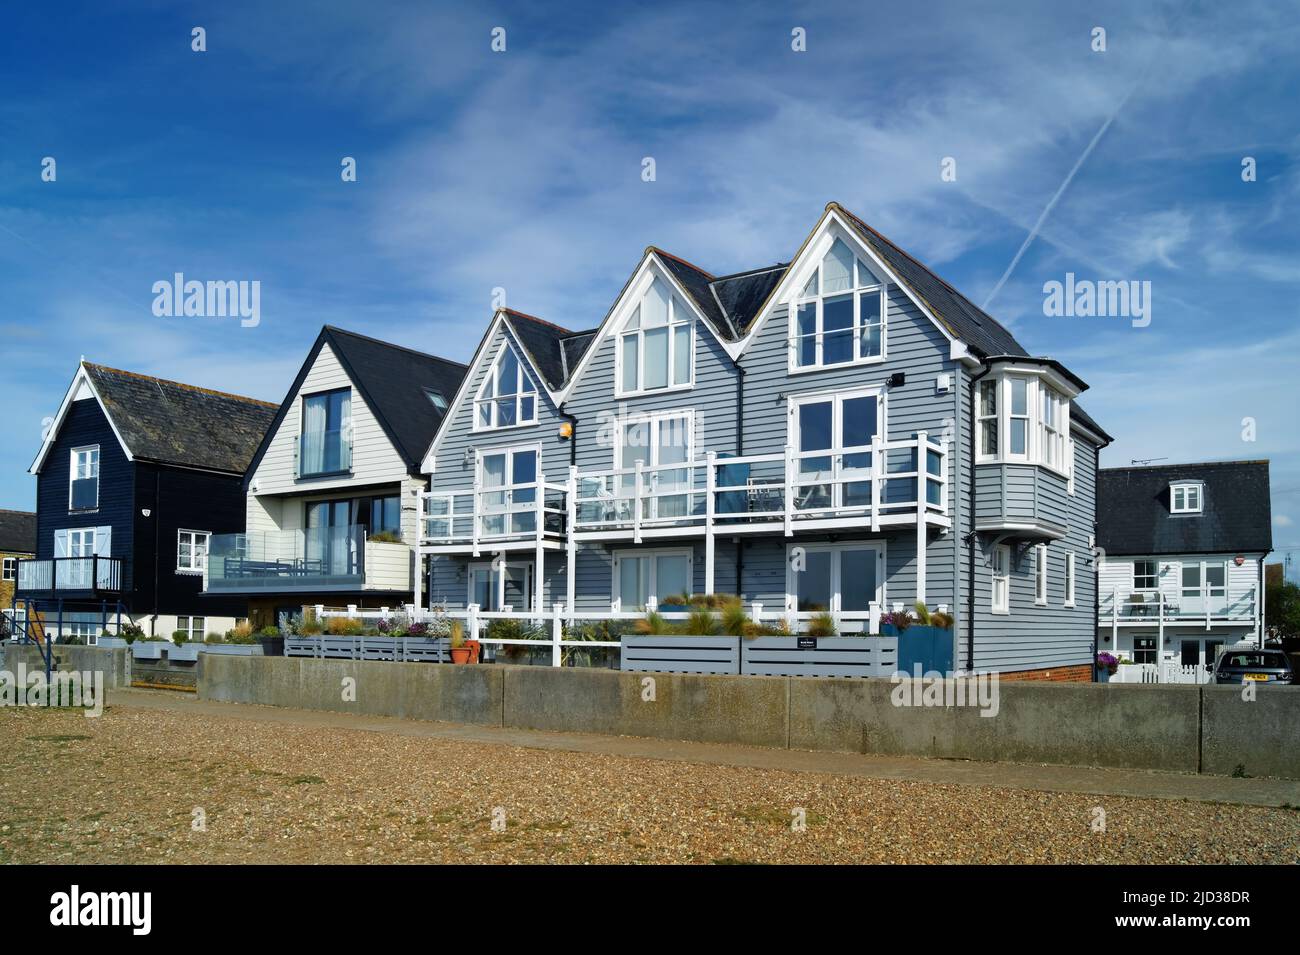 UK, Kent, Whitstable Seafront Houses Stock Photo